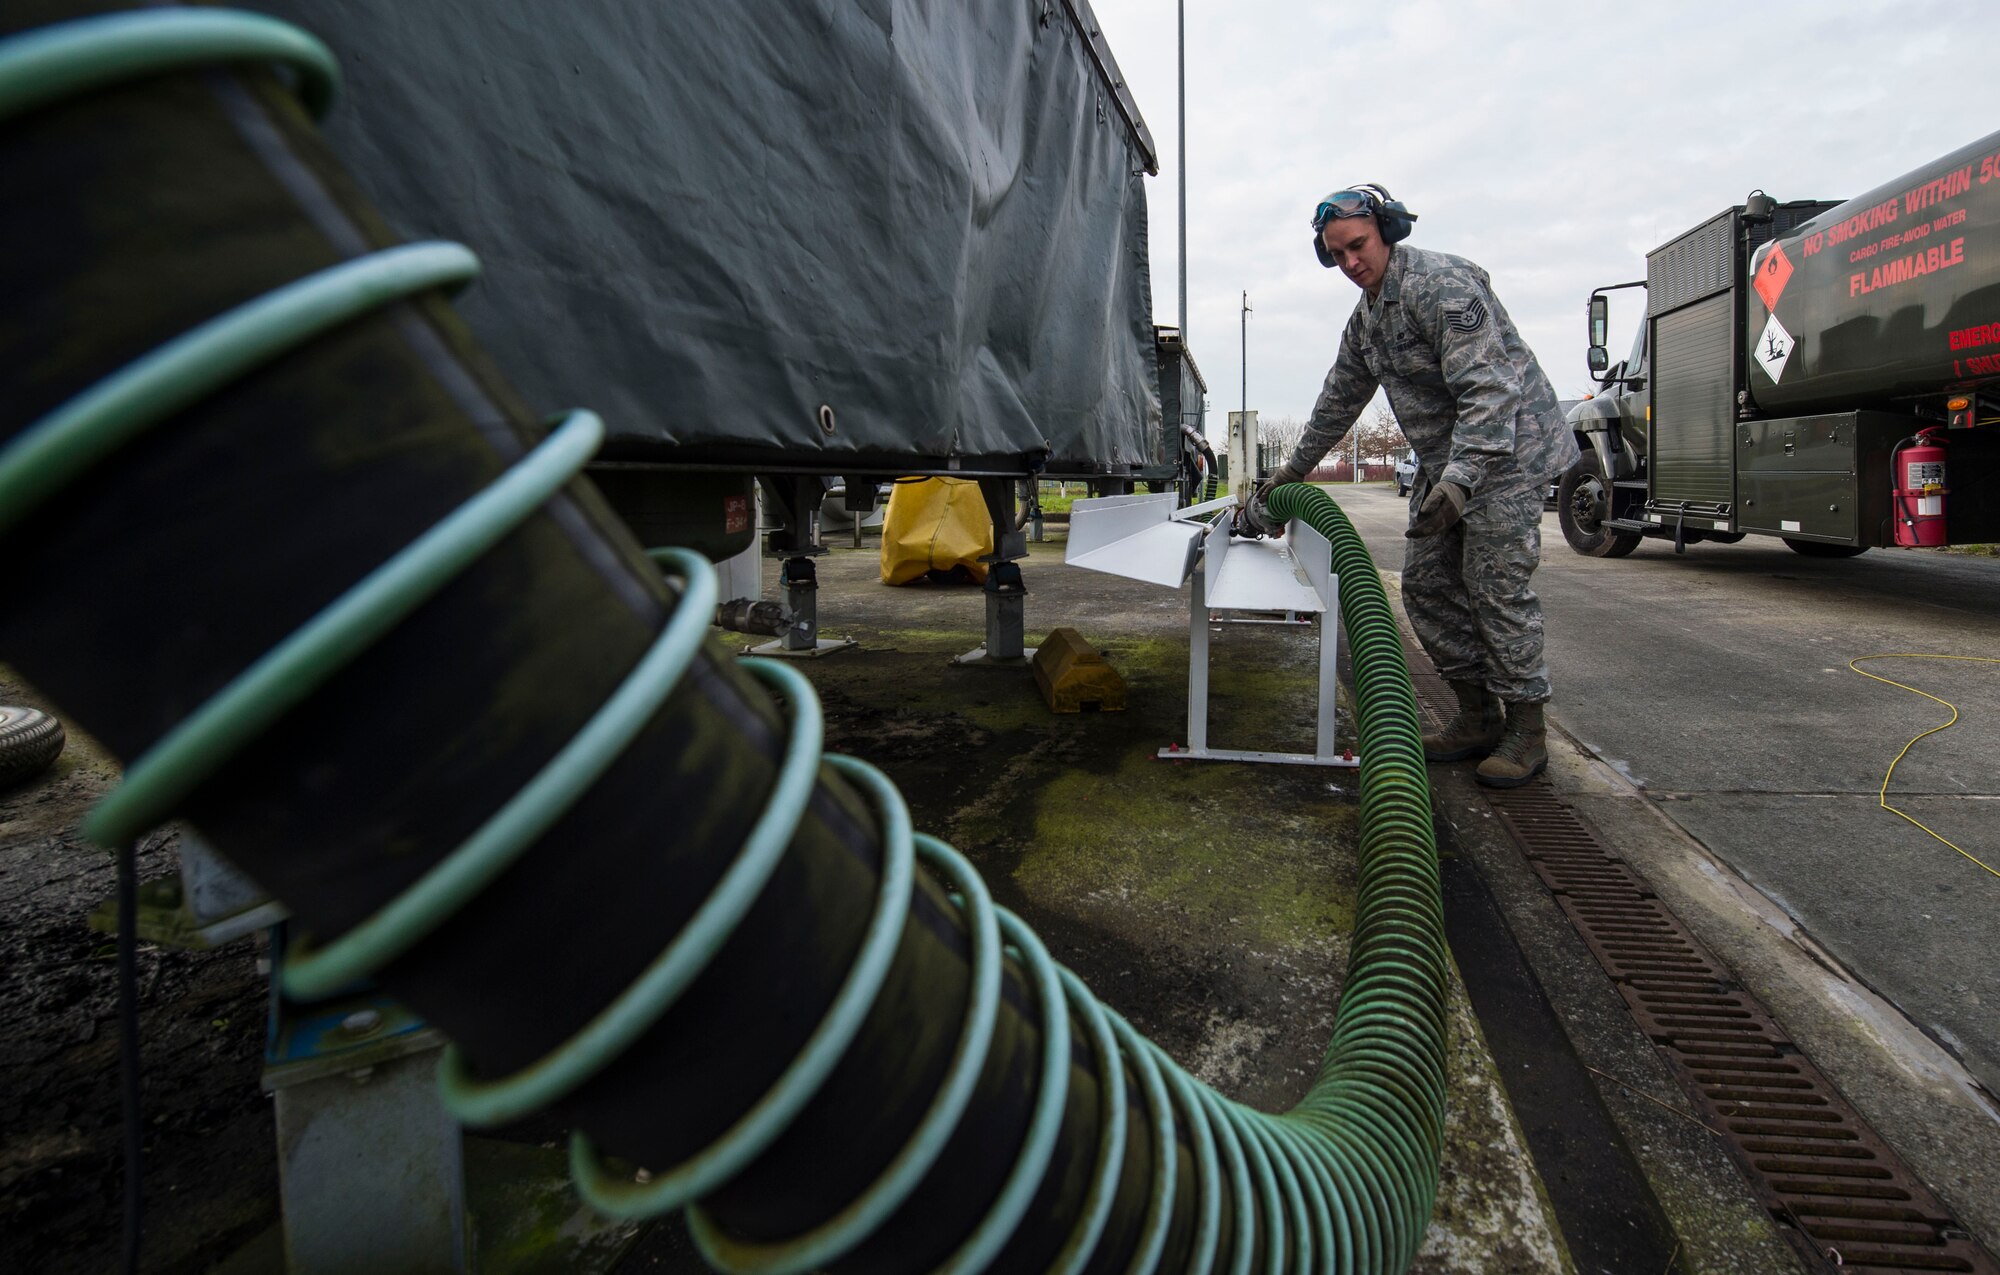 Tech. Sgt. Marcus Romero, 424th Air Base Squadron fuels management technician, stows a hose after refilling a fuel truck at Chièvres Air Base, Belgium, Feb. 25, 2016. Romero is one of 70 Airmen assigned to the 424th ABS. (U.S. Air Force photo/Staff Sgt. Sara Keller)